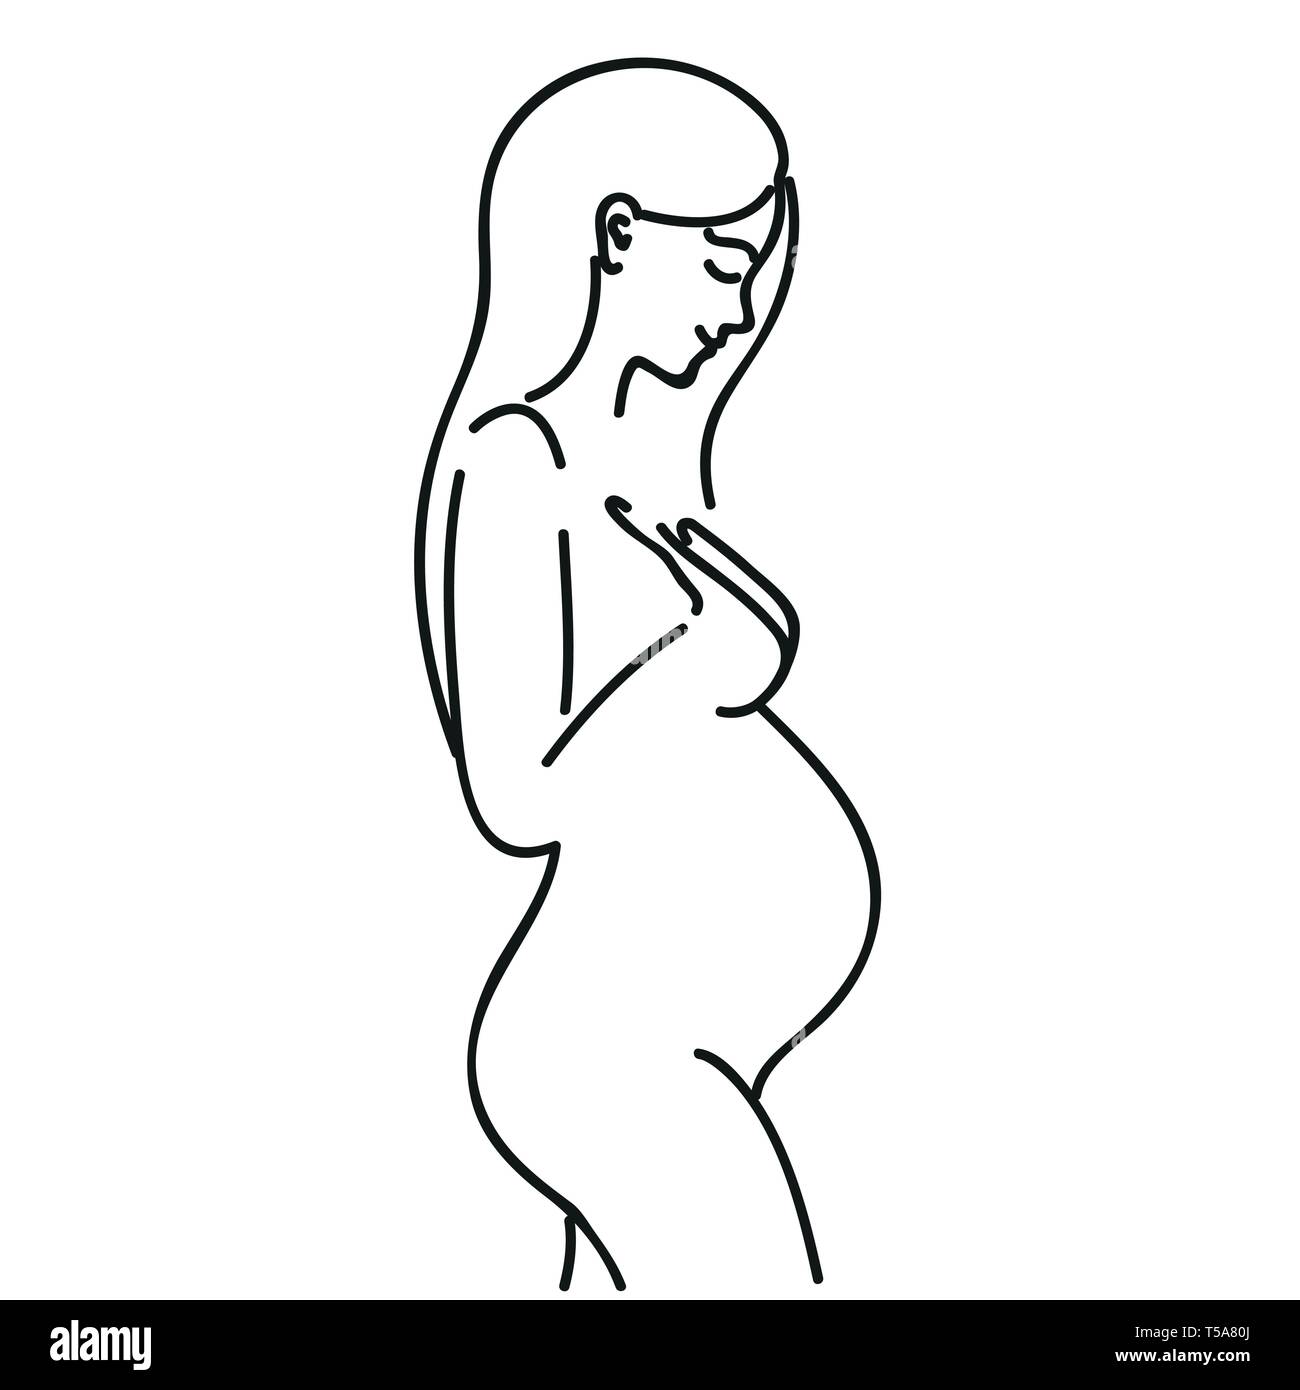 How to draw pregnant lady || Pencil drawing ||Gali Gali Art || - YouTube